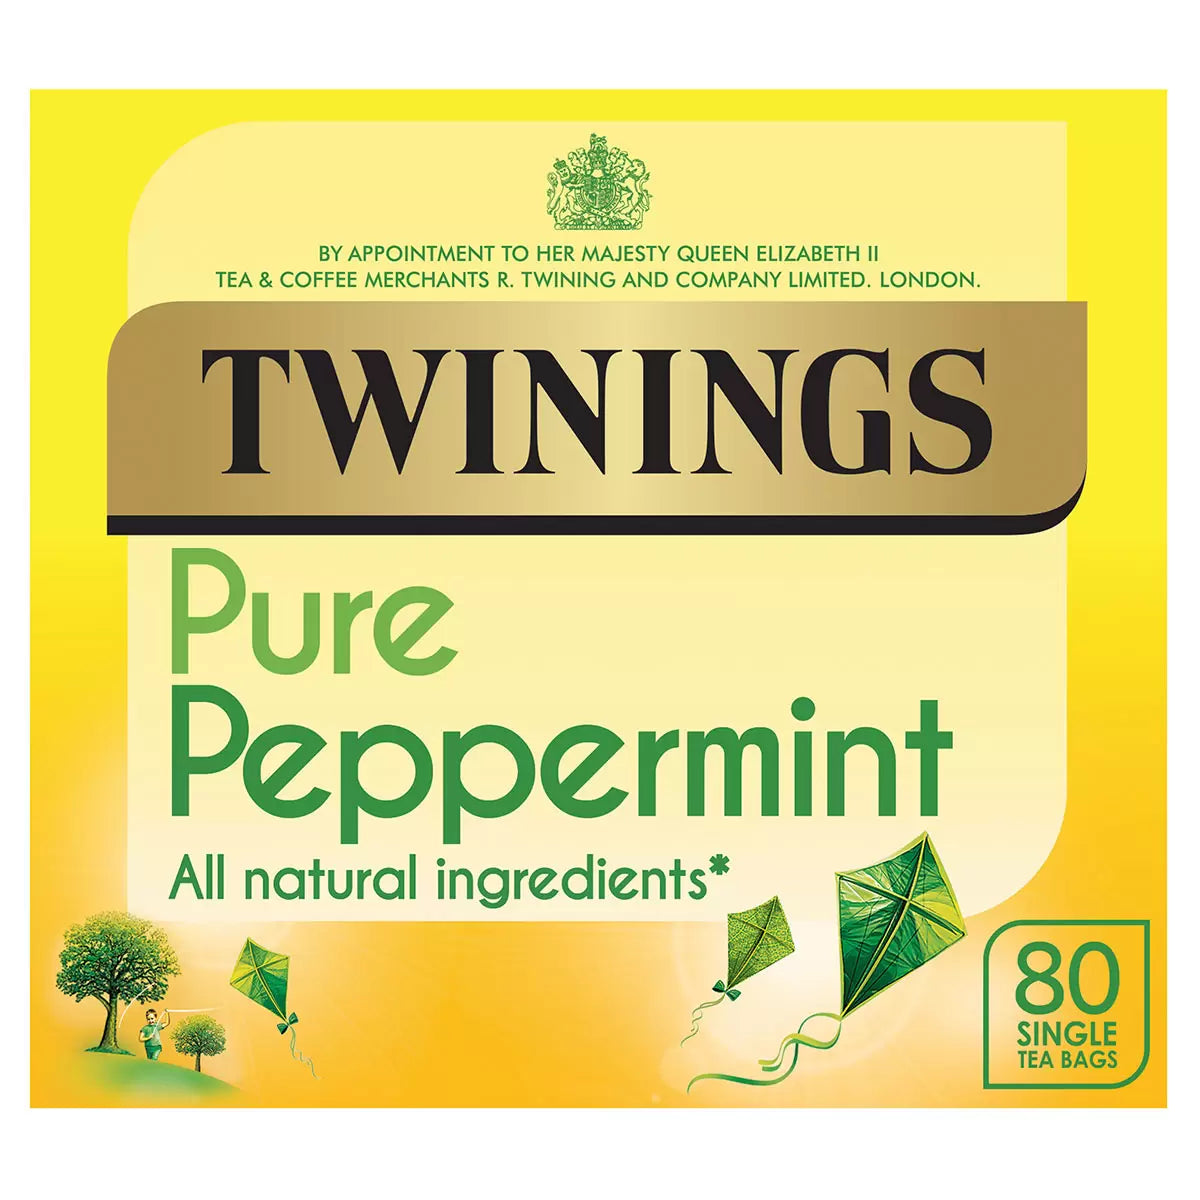 Twinings Pure Peppermint Tea Bags - Pack of 80